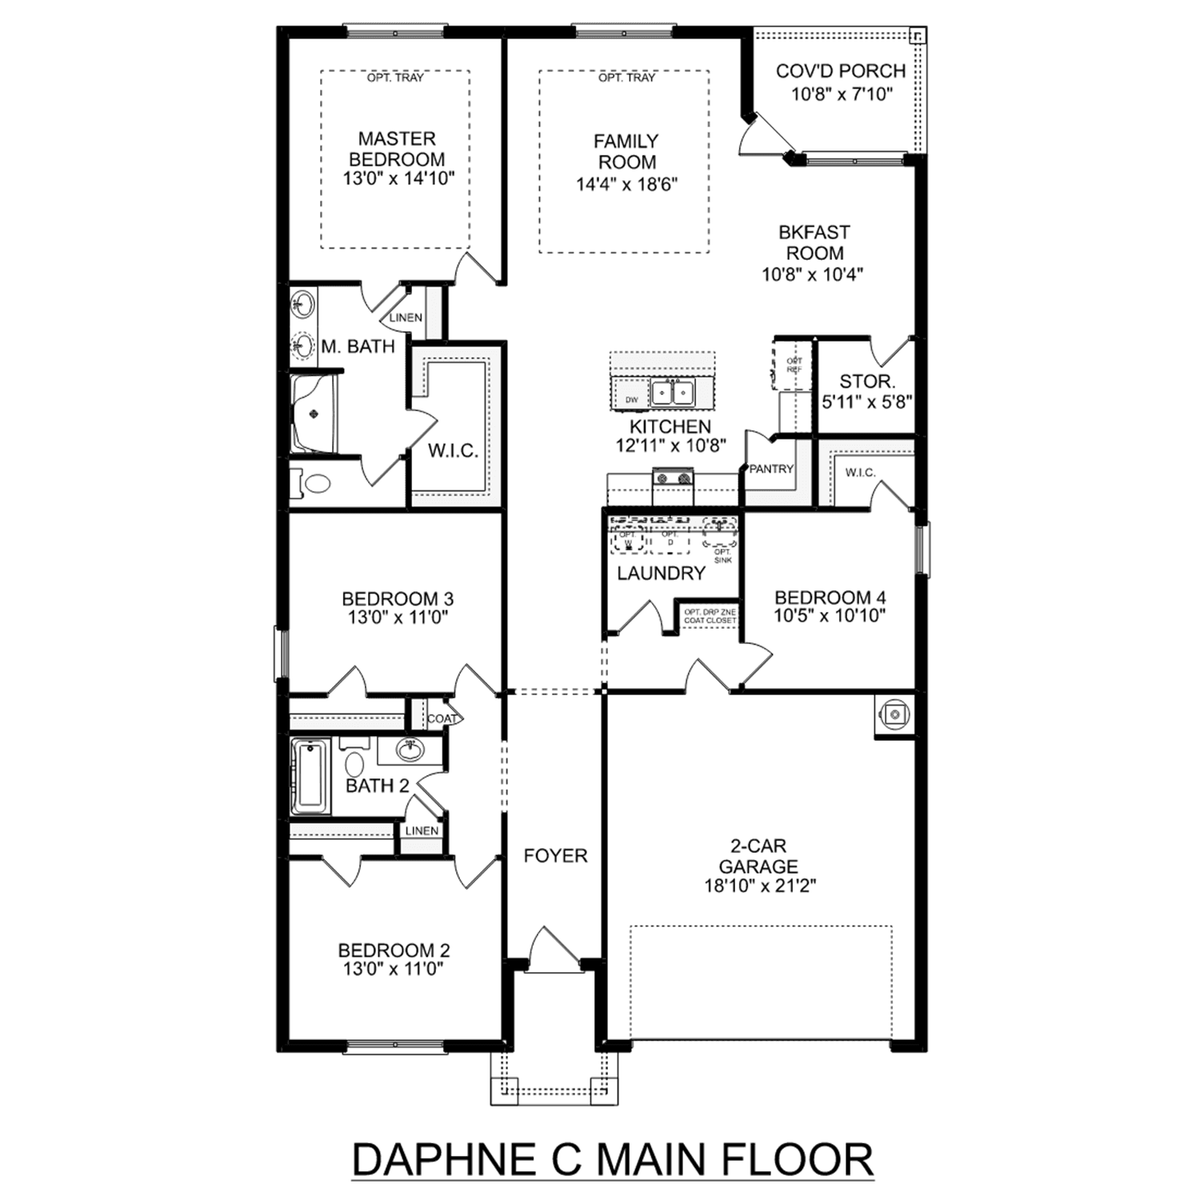 1 - The Daphne C buildable floor plan layout in Davidson Homes' Spragins Cove community.